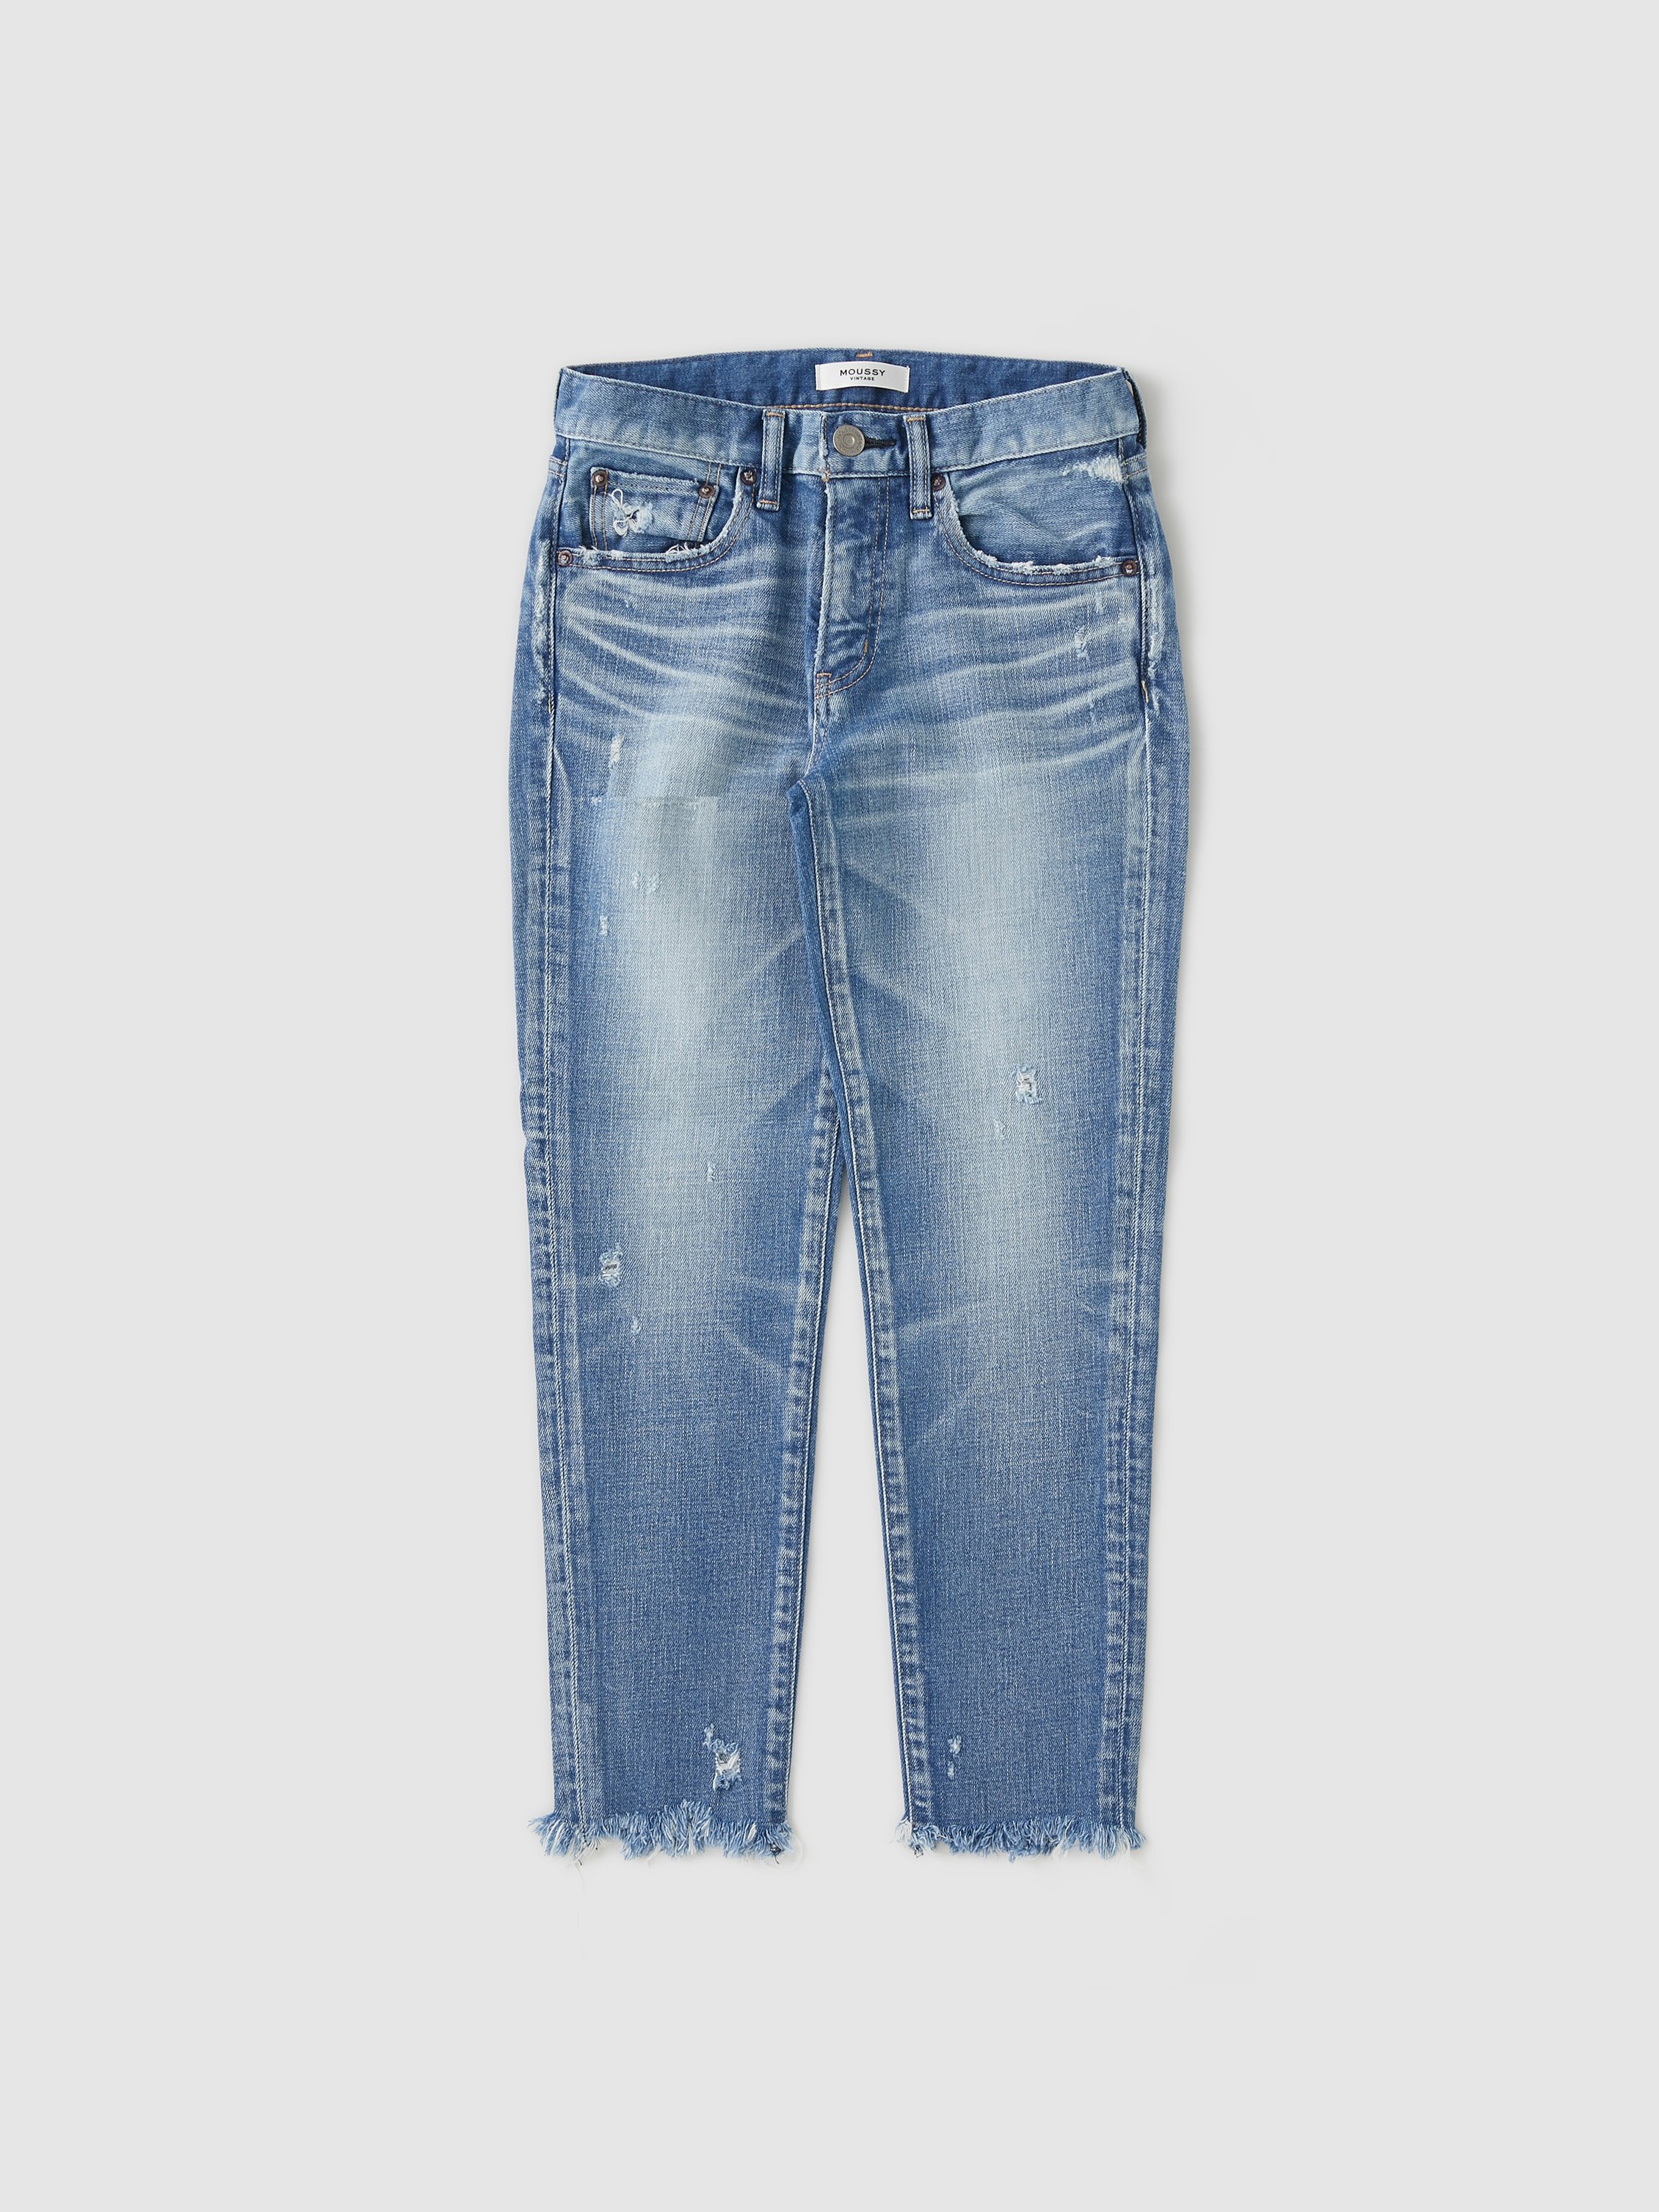 moussy official jeans